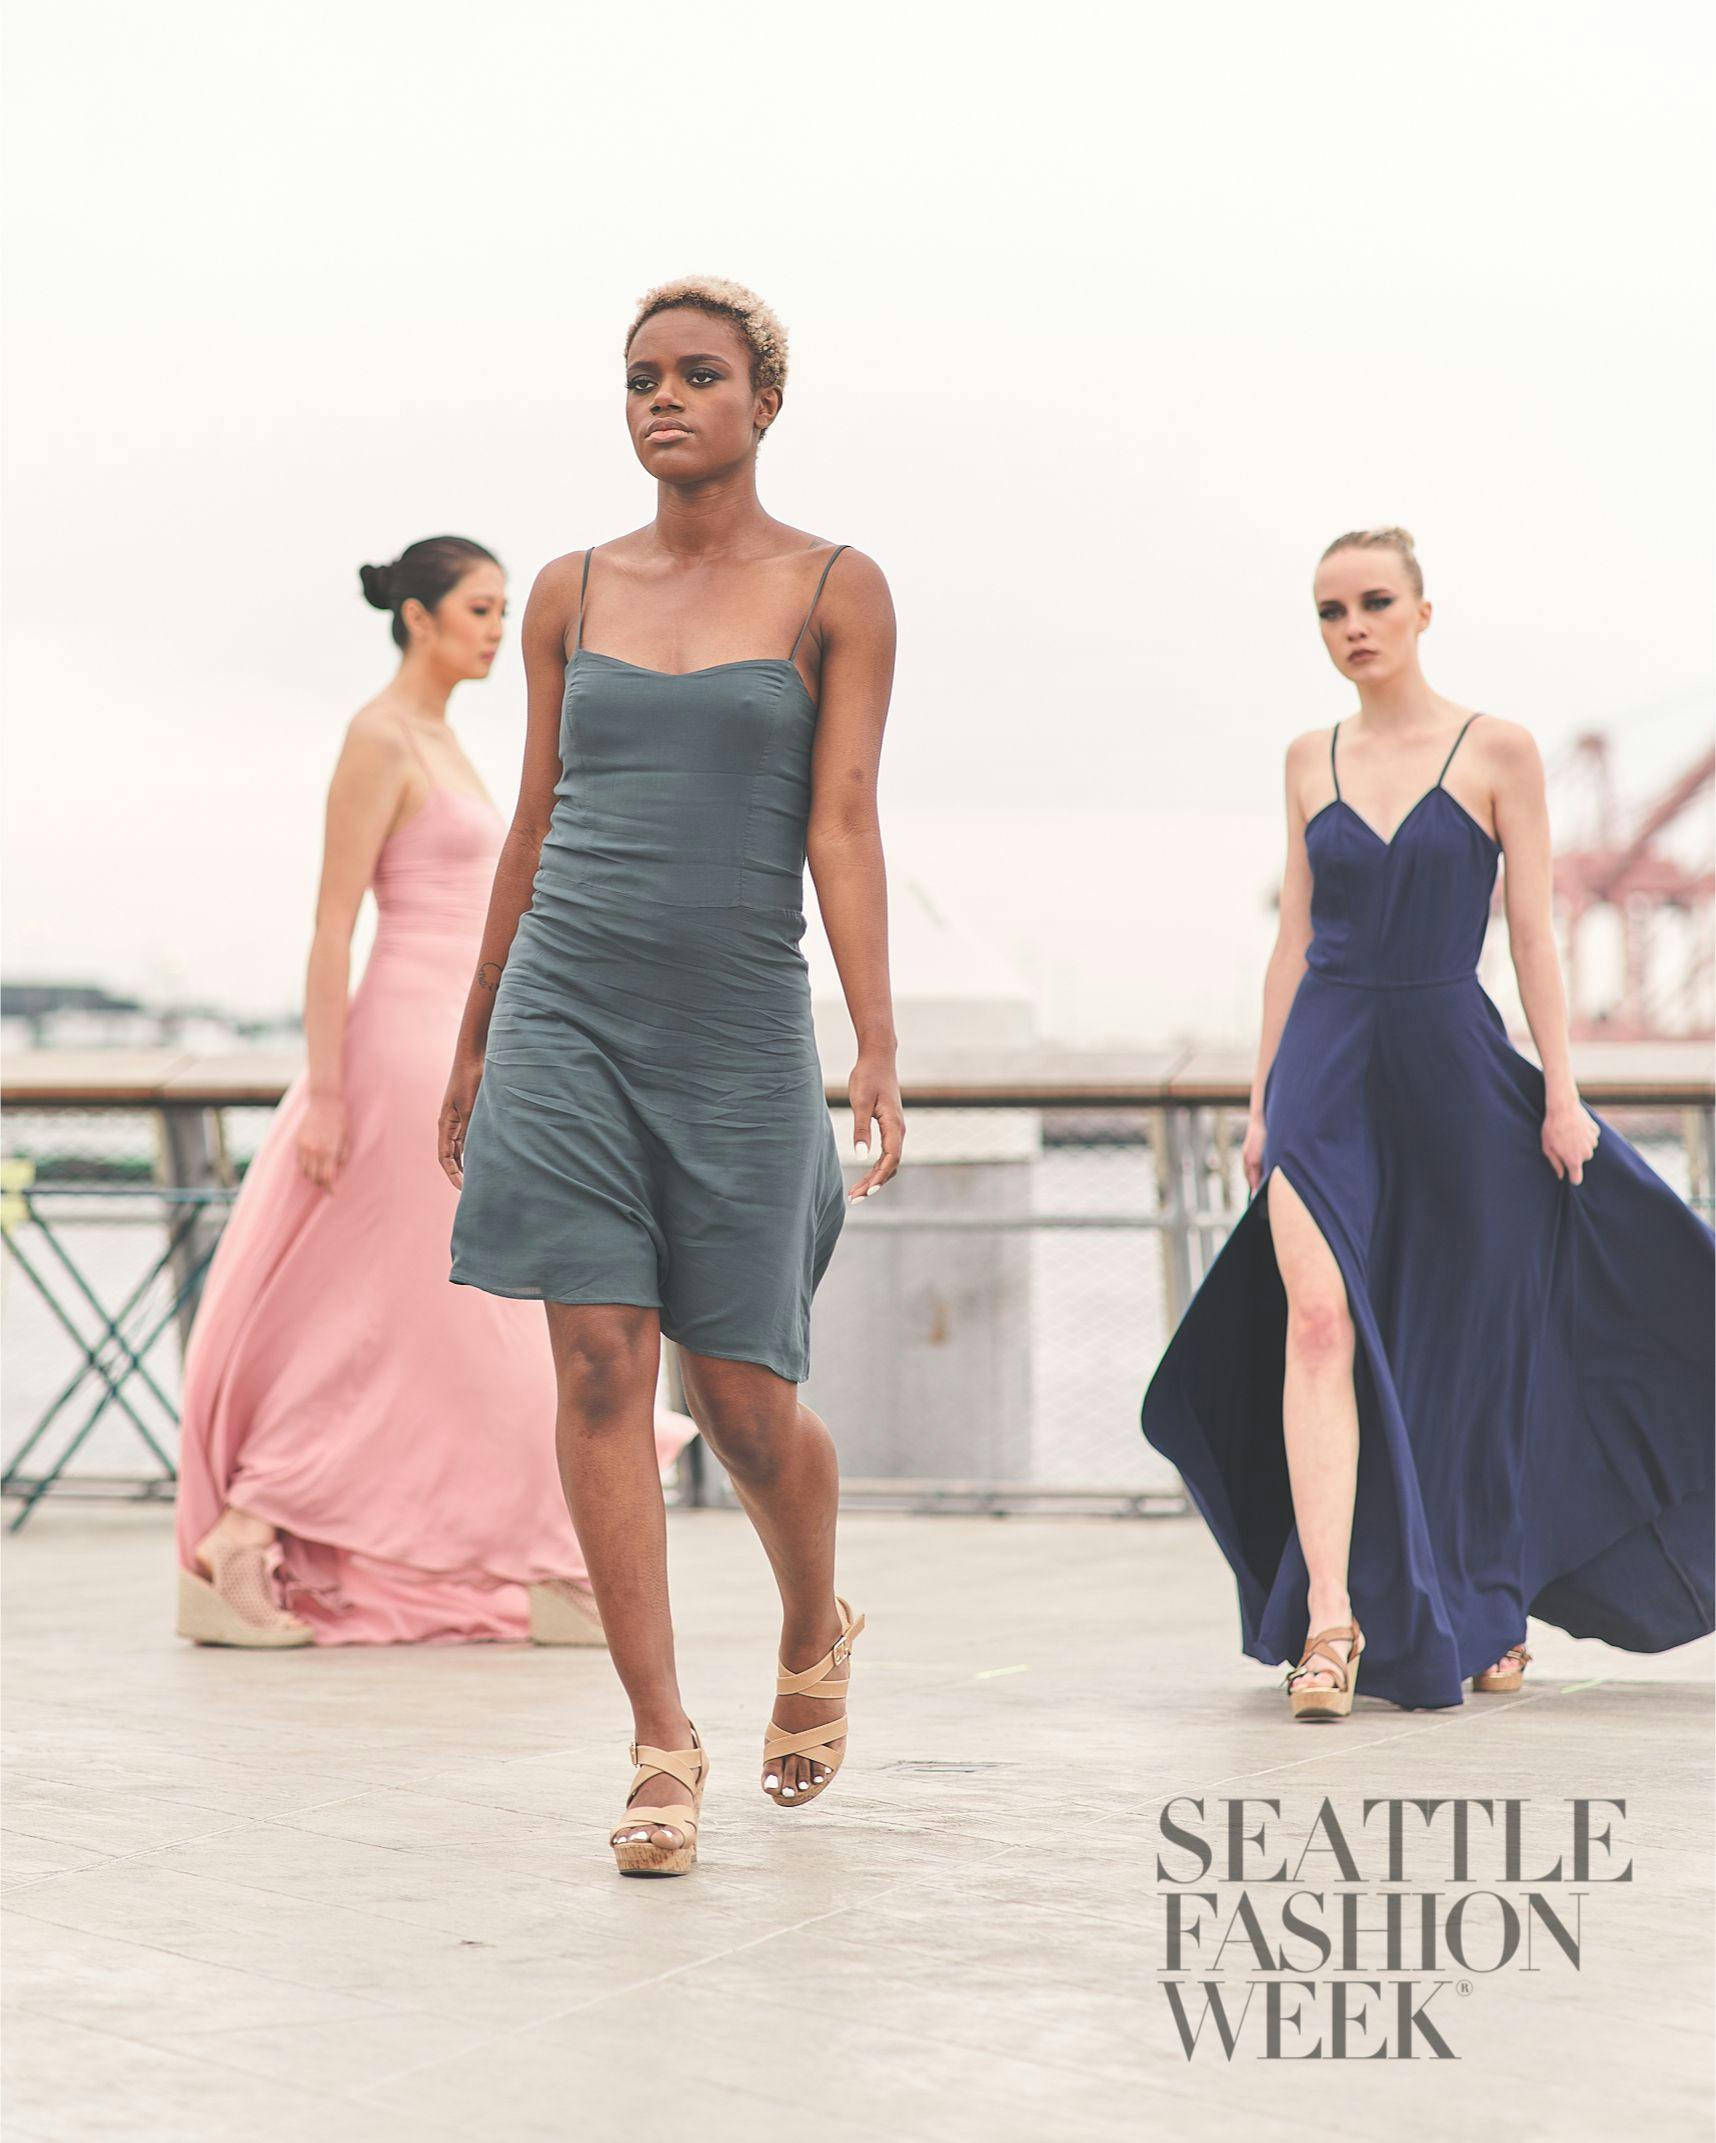 Ad for Seattle Fashion Week